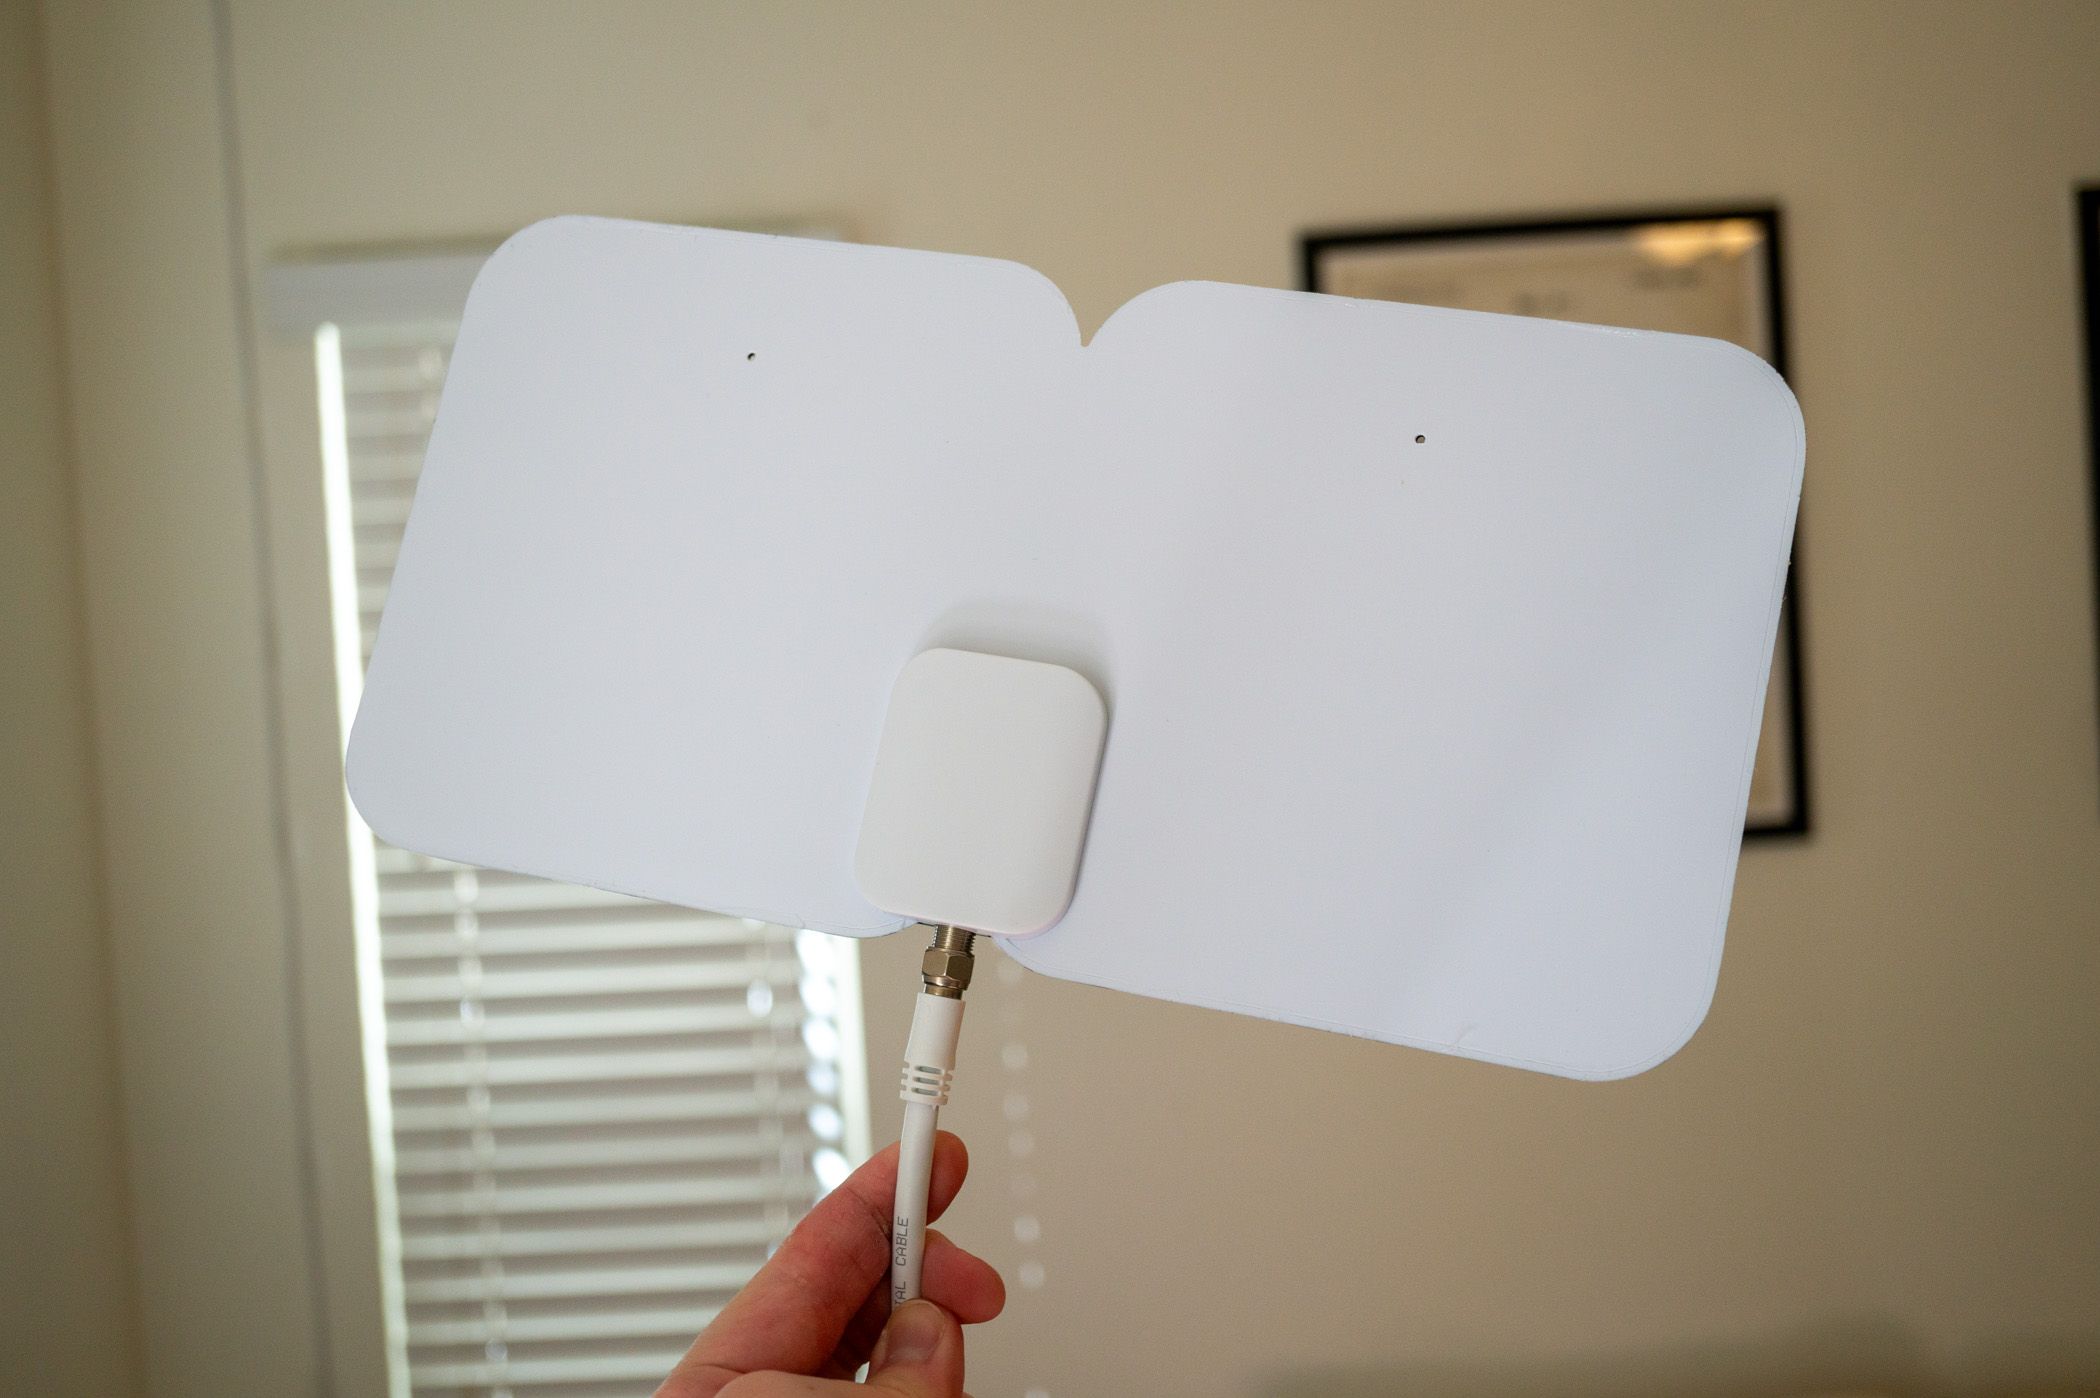 Holding a TV antenna from Tablo 4th Gen